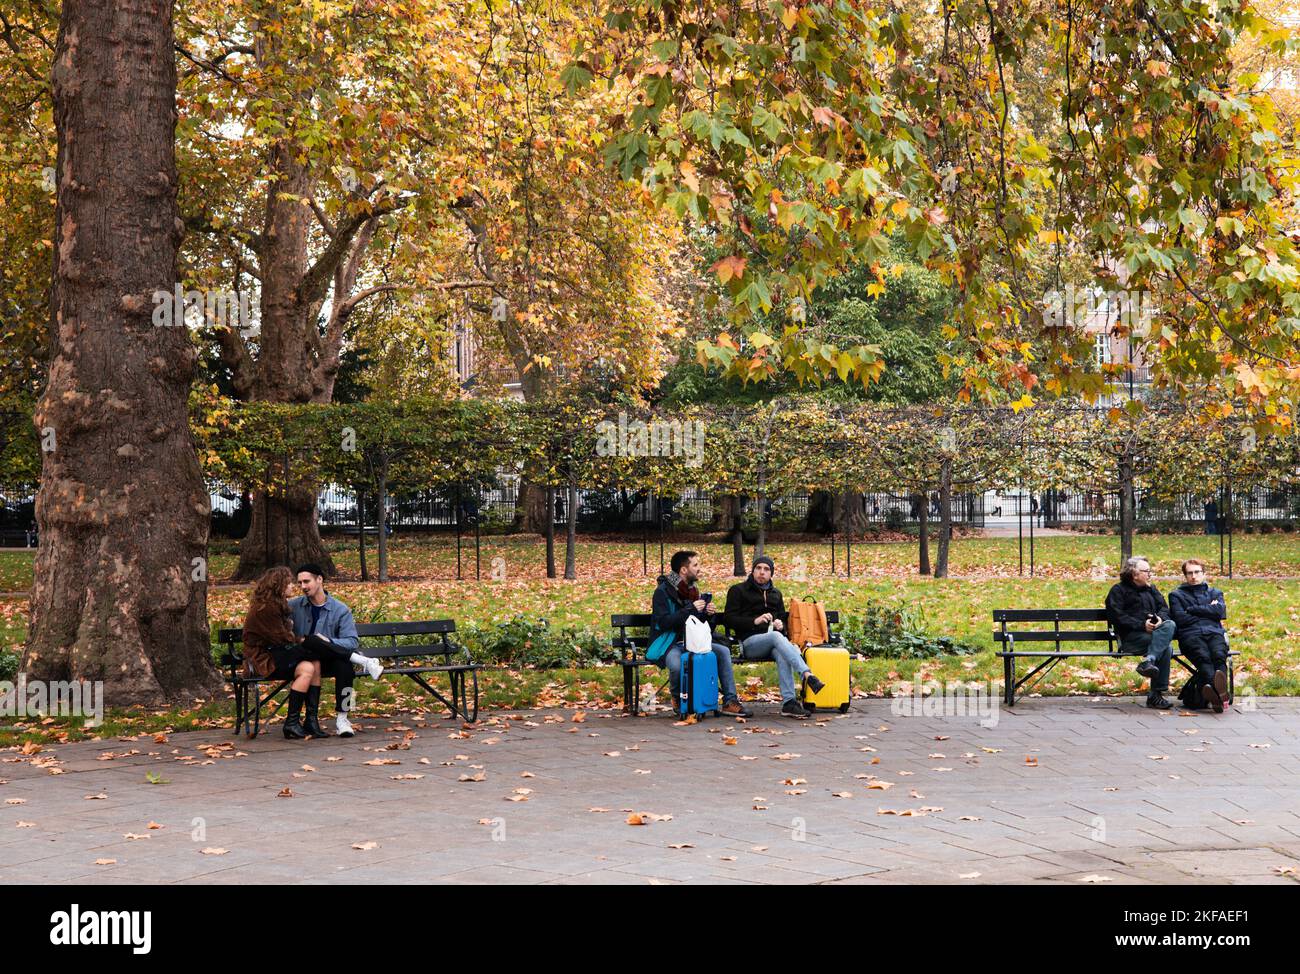 Russell Square London; people sitting on benches in Russell Square in autumn, Bloomsbury London UK Stock Photo